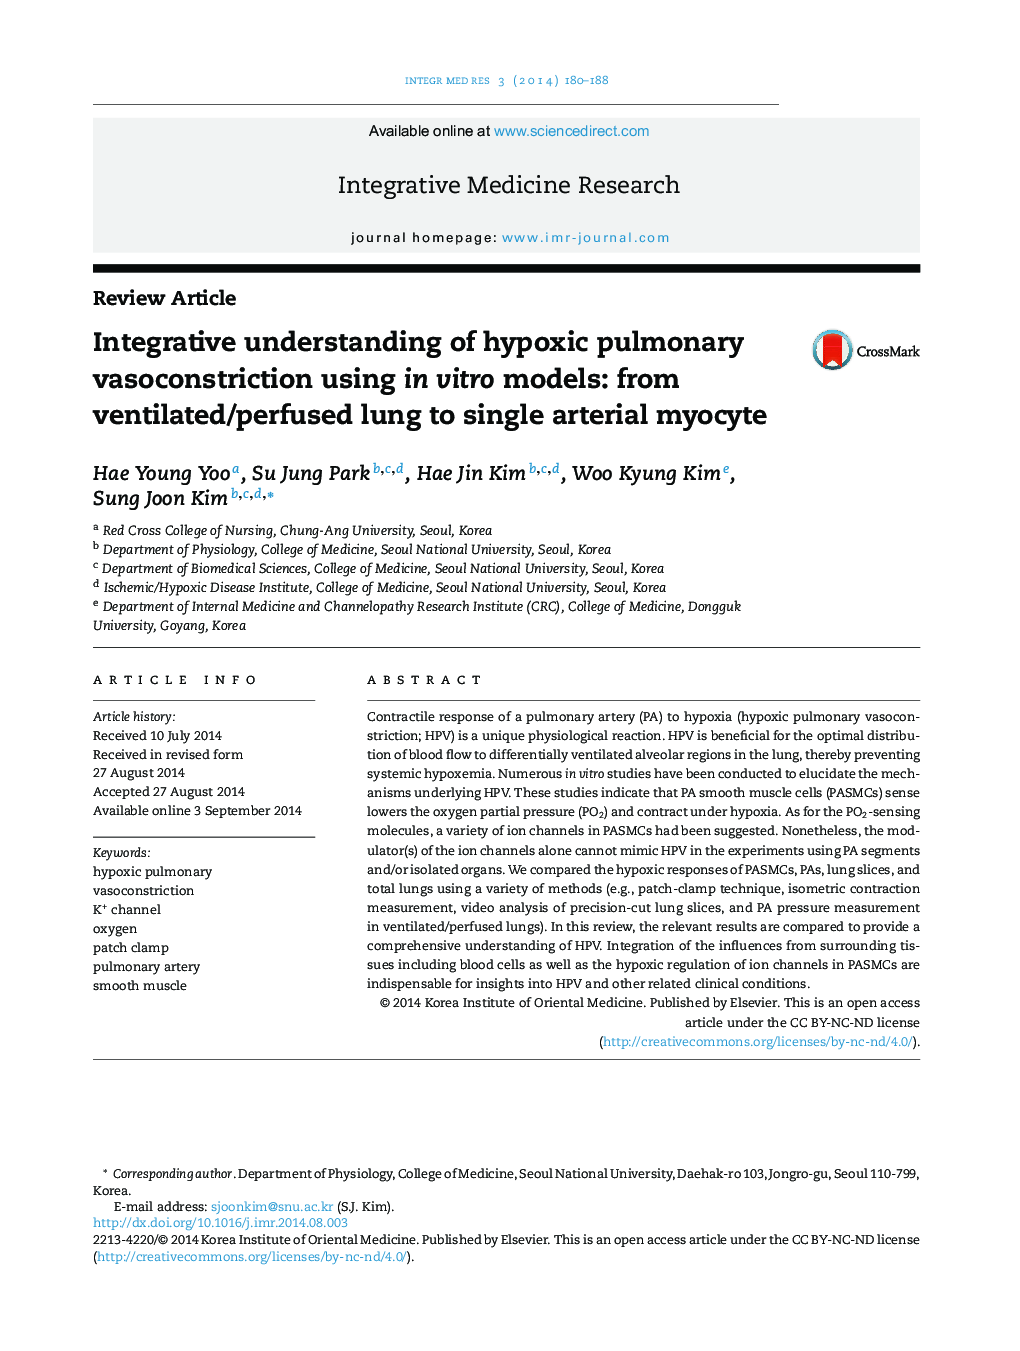 Integrative understanding of hypoxic pulmonary vasoconstriction using in vitro models: from ventilated/perfused lung to single arterial myocyte